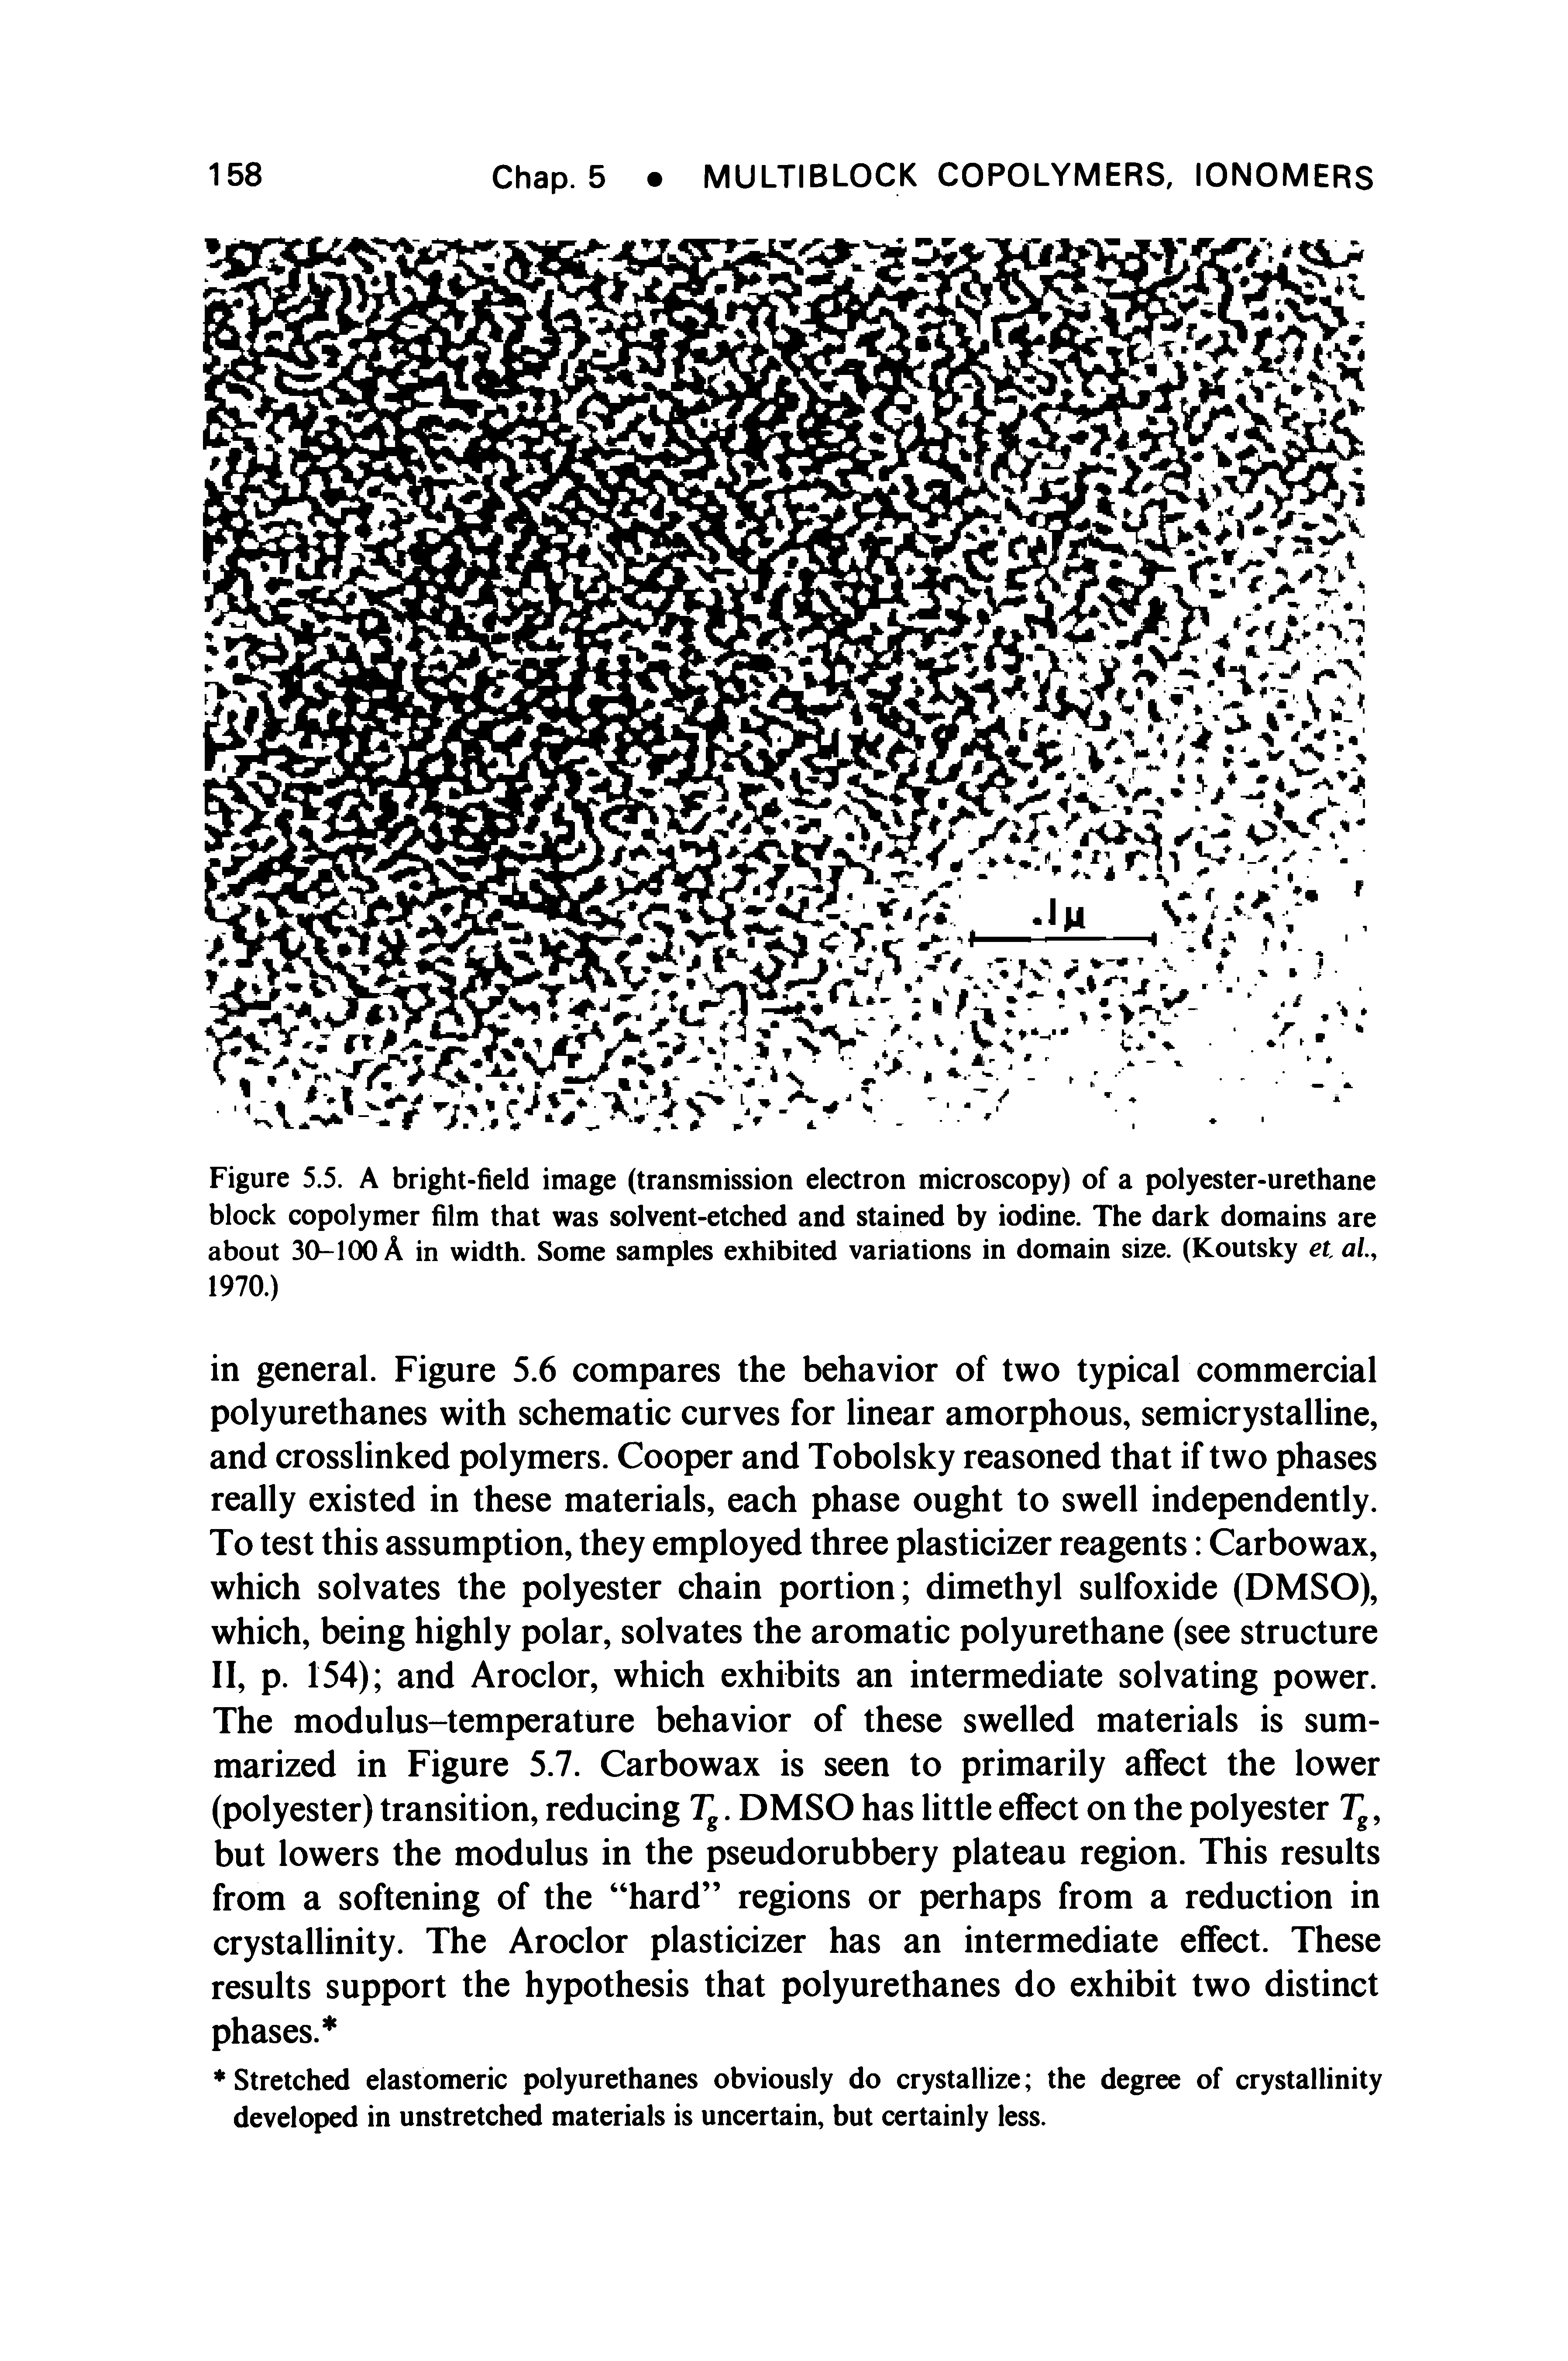 Figure 5.5. A bright-field image (transmission electron microscopy) of a polyester-urethane block copolymer film that was solvent-etched and stained by iodine. The dark domains are about 30-100 A in width. Some samples exhibited variations in domain size. (Koutsky et, al, 1970.)...